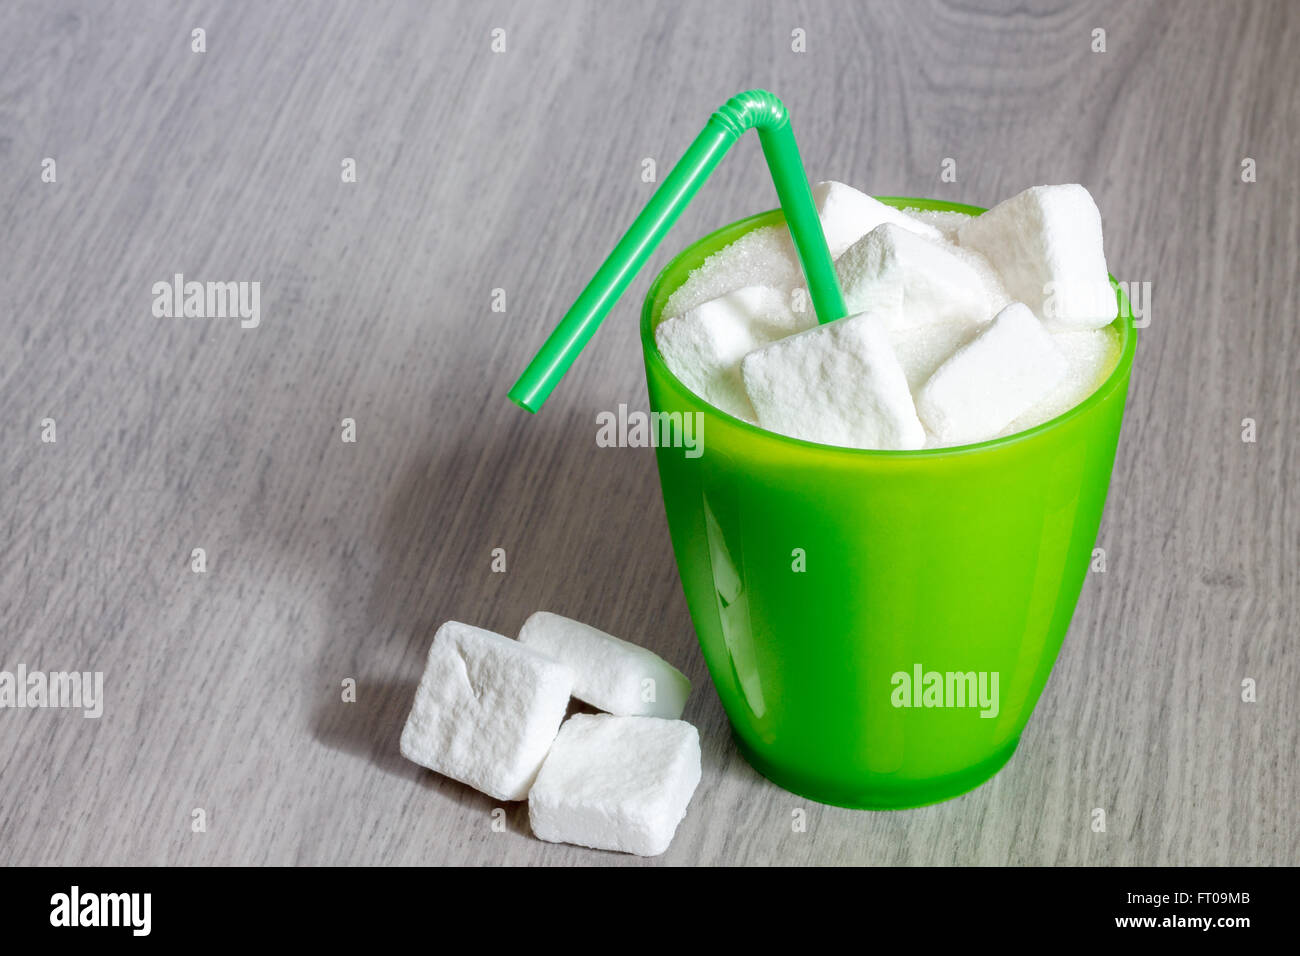 Green plastic glass with straw full of sugar and sugar cubes. Concept image for too much sugar in sodas, juices, beverages, soft Stock Photo